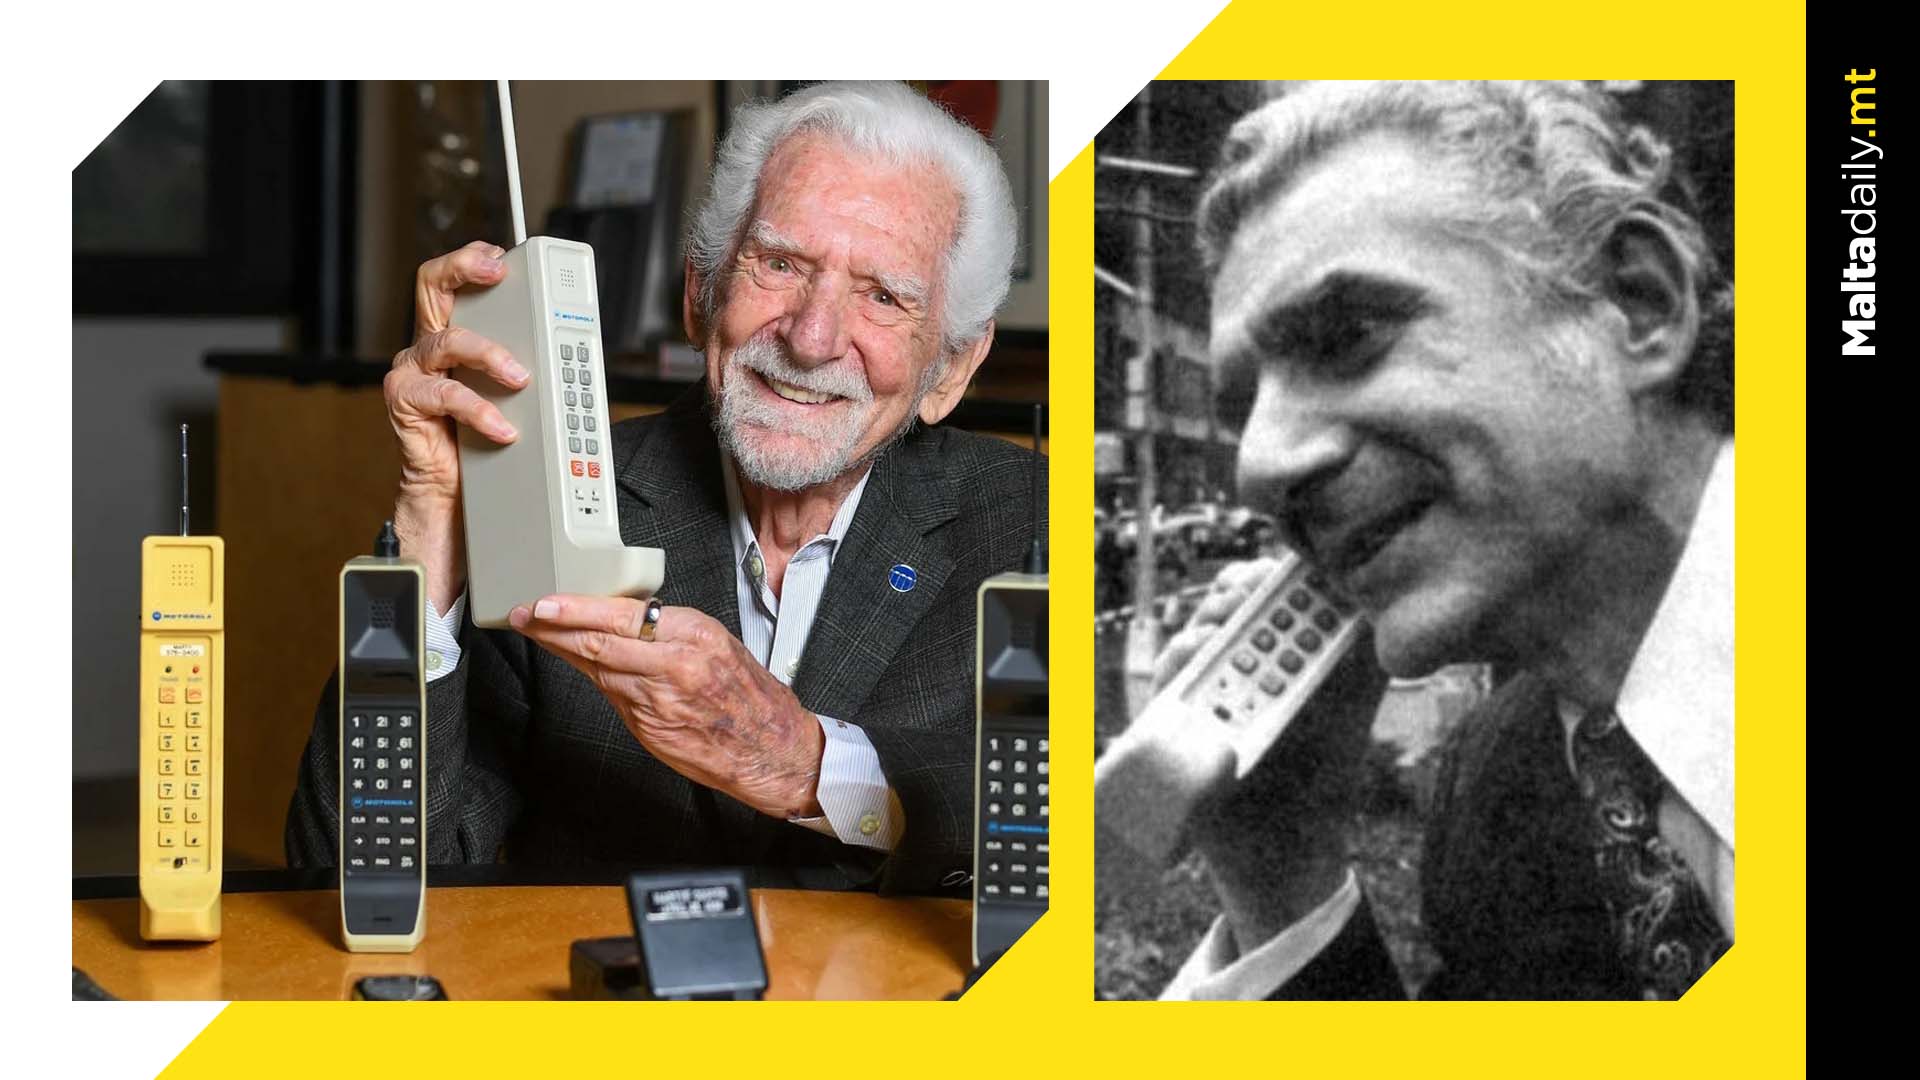 First mobile phone call was made around 50 years ago